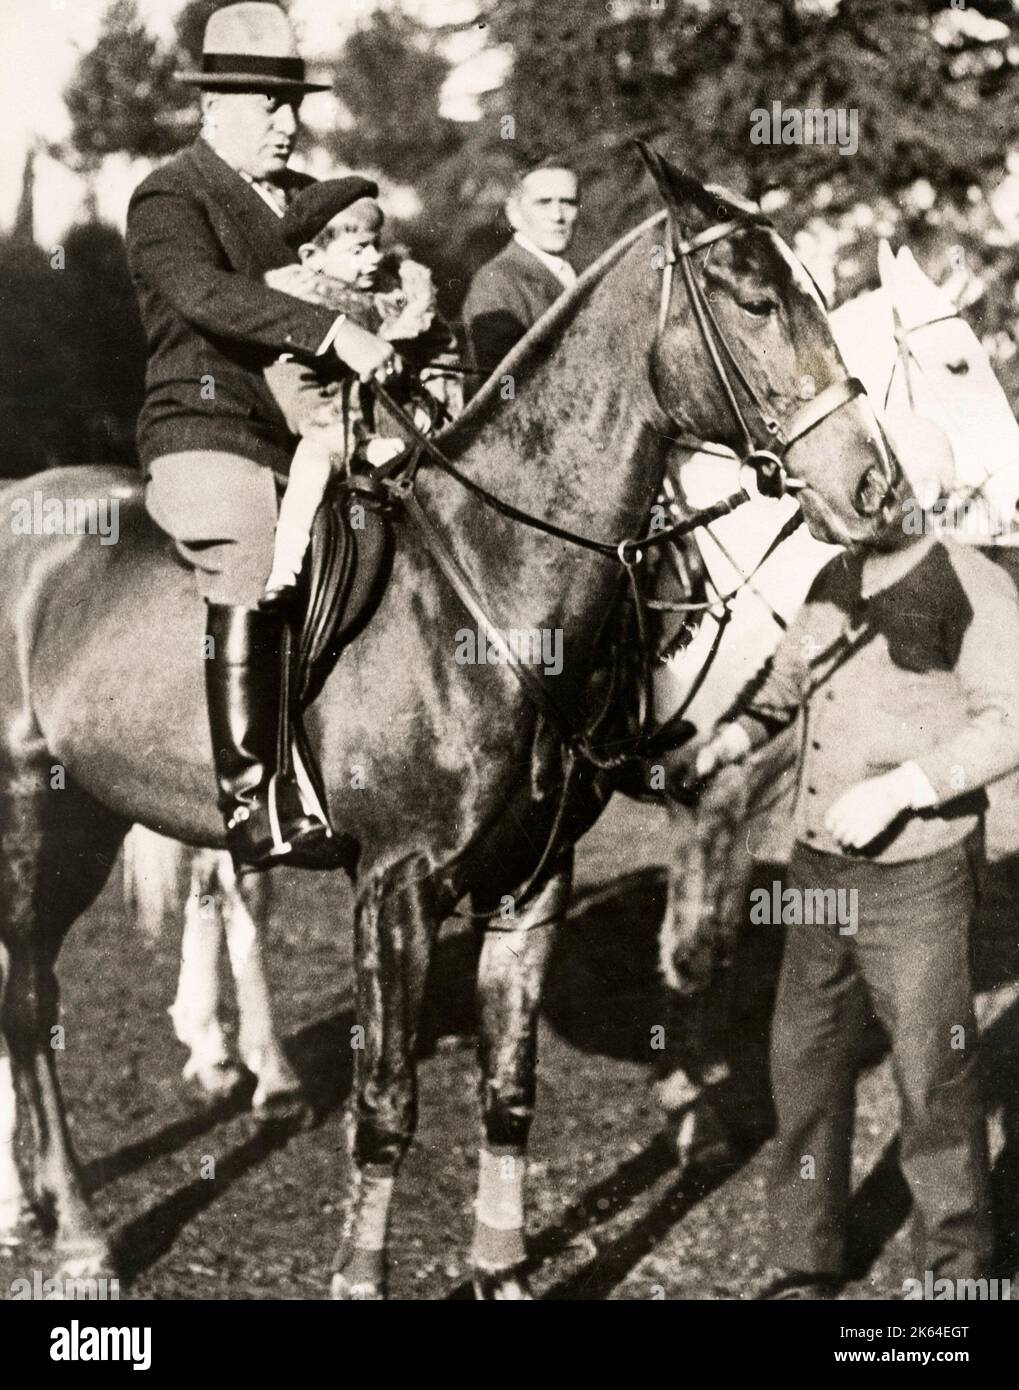 Early 20th century vintage press photograph - Italian fascist leader Benito Mussolini and one of this sons on horseback at Villa Torlonia, Rome, c.1920s Stock Photo